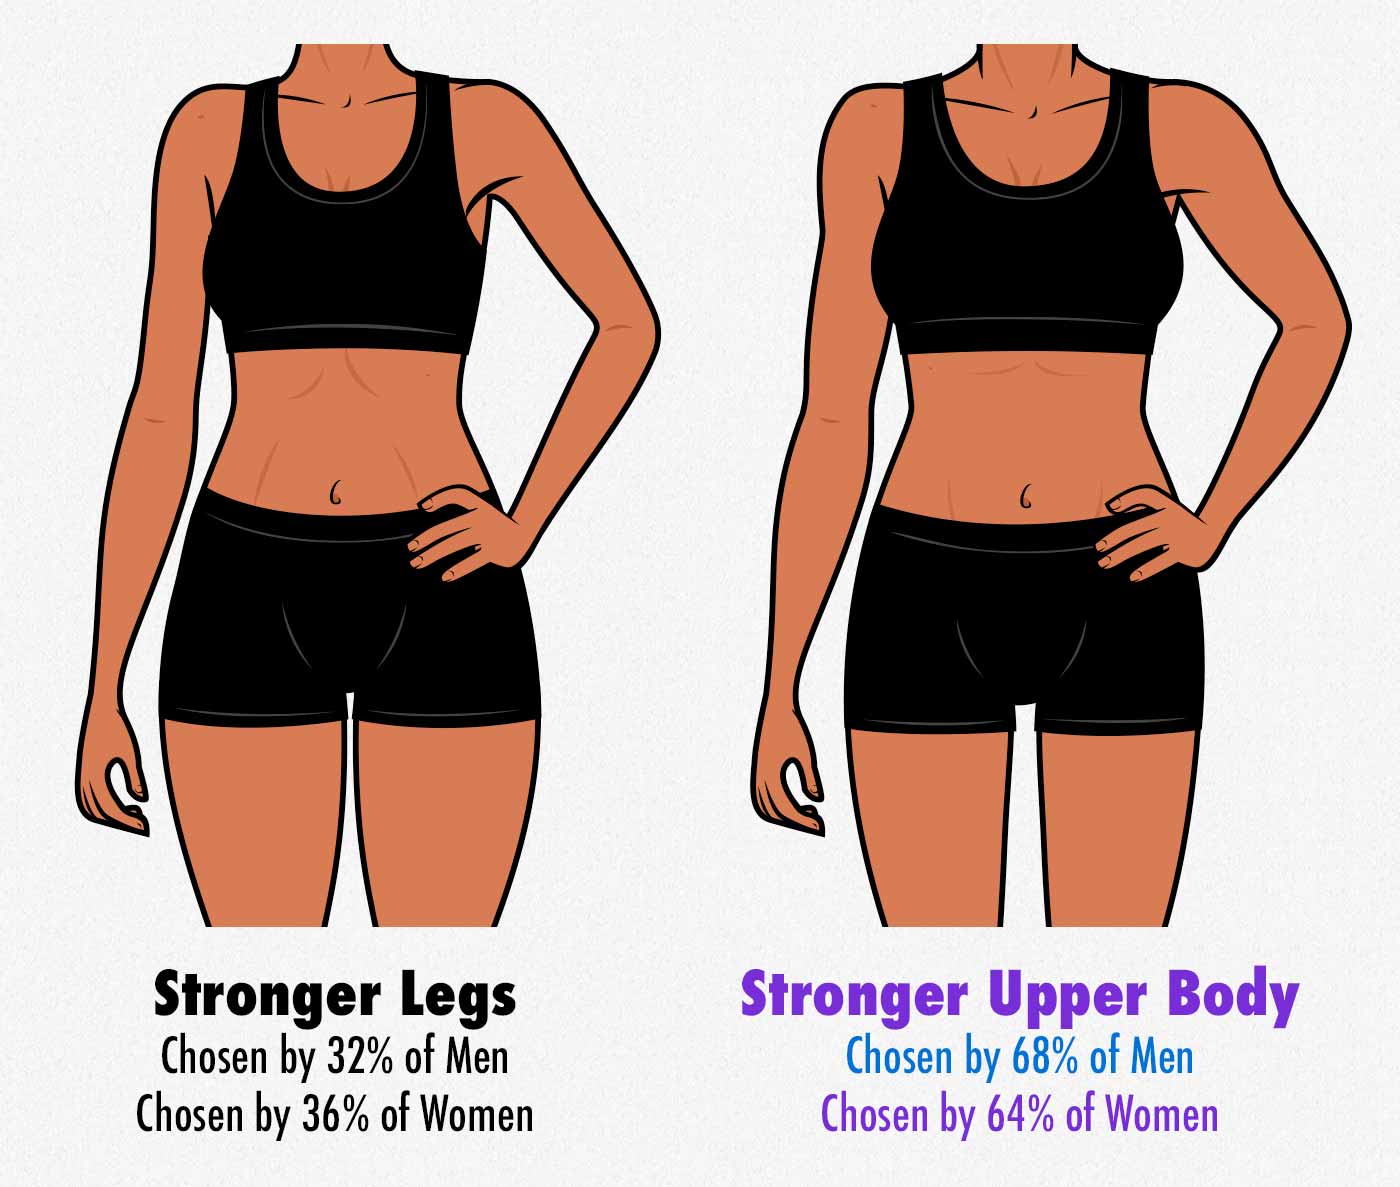 Survey results showing that men prefer women with strong upper bodies.